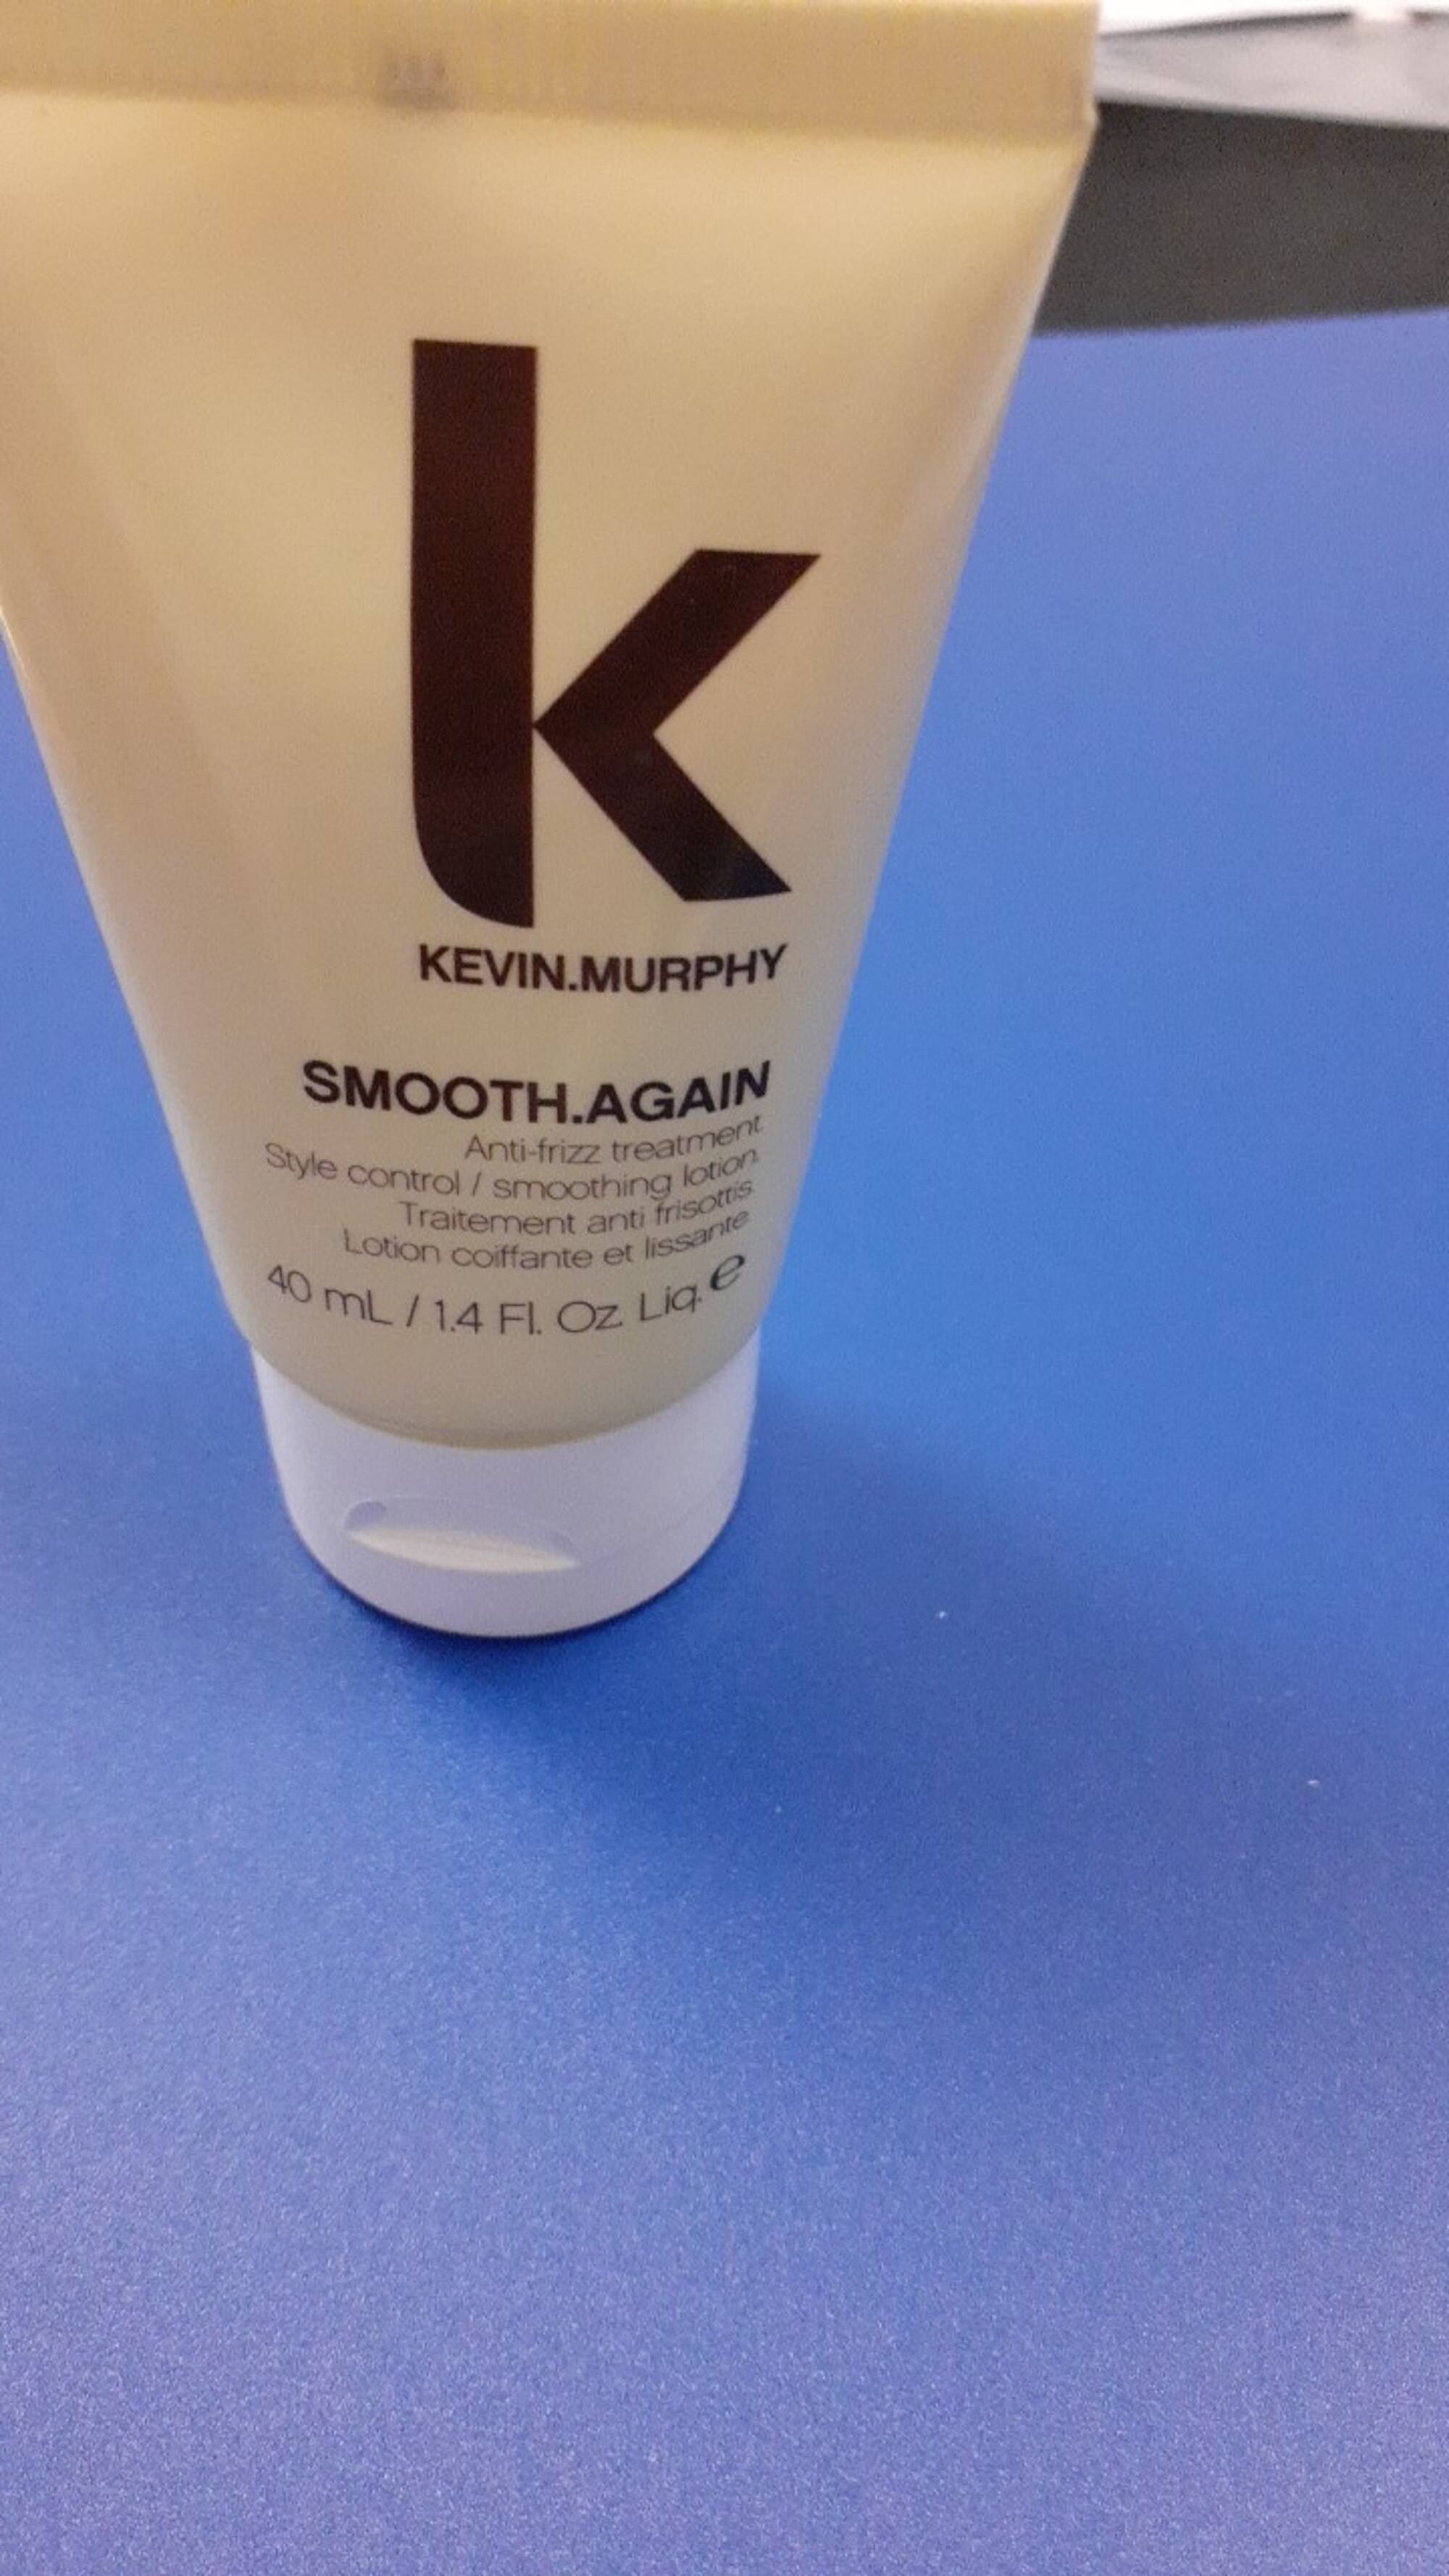 KEVIN MURPHY - Smooth.again - Lotion coiffante et lissante 